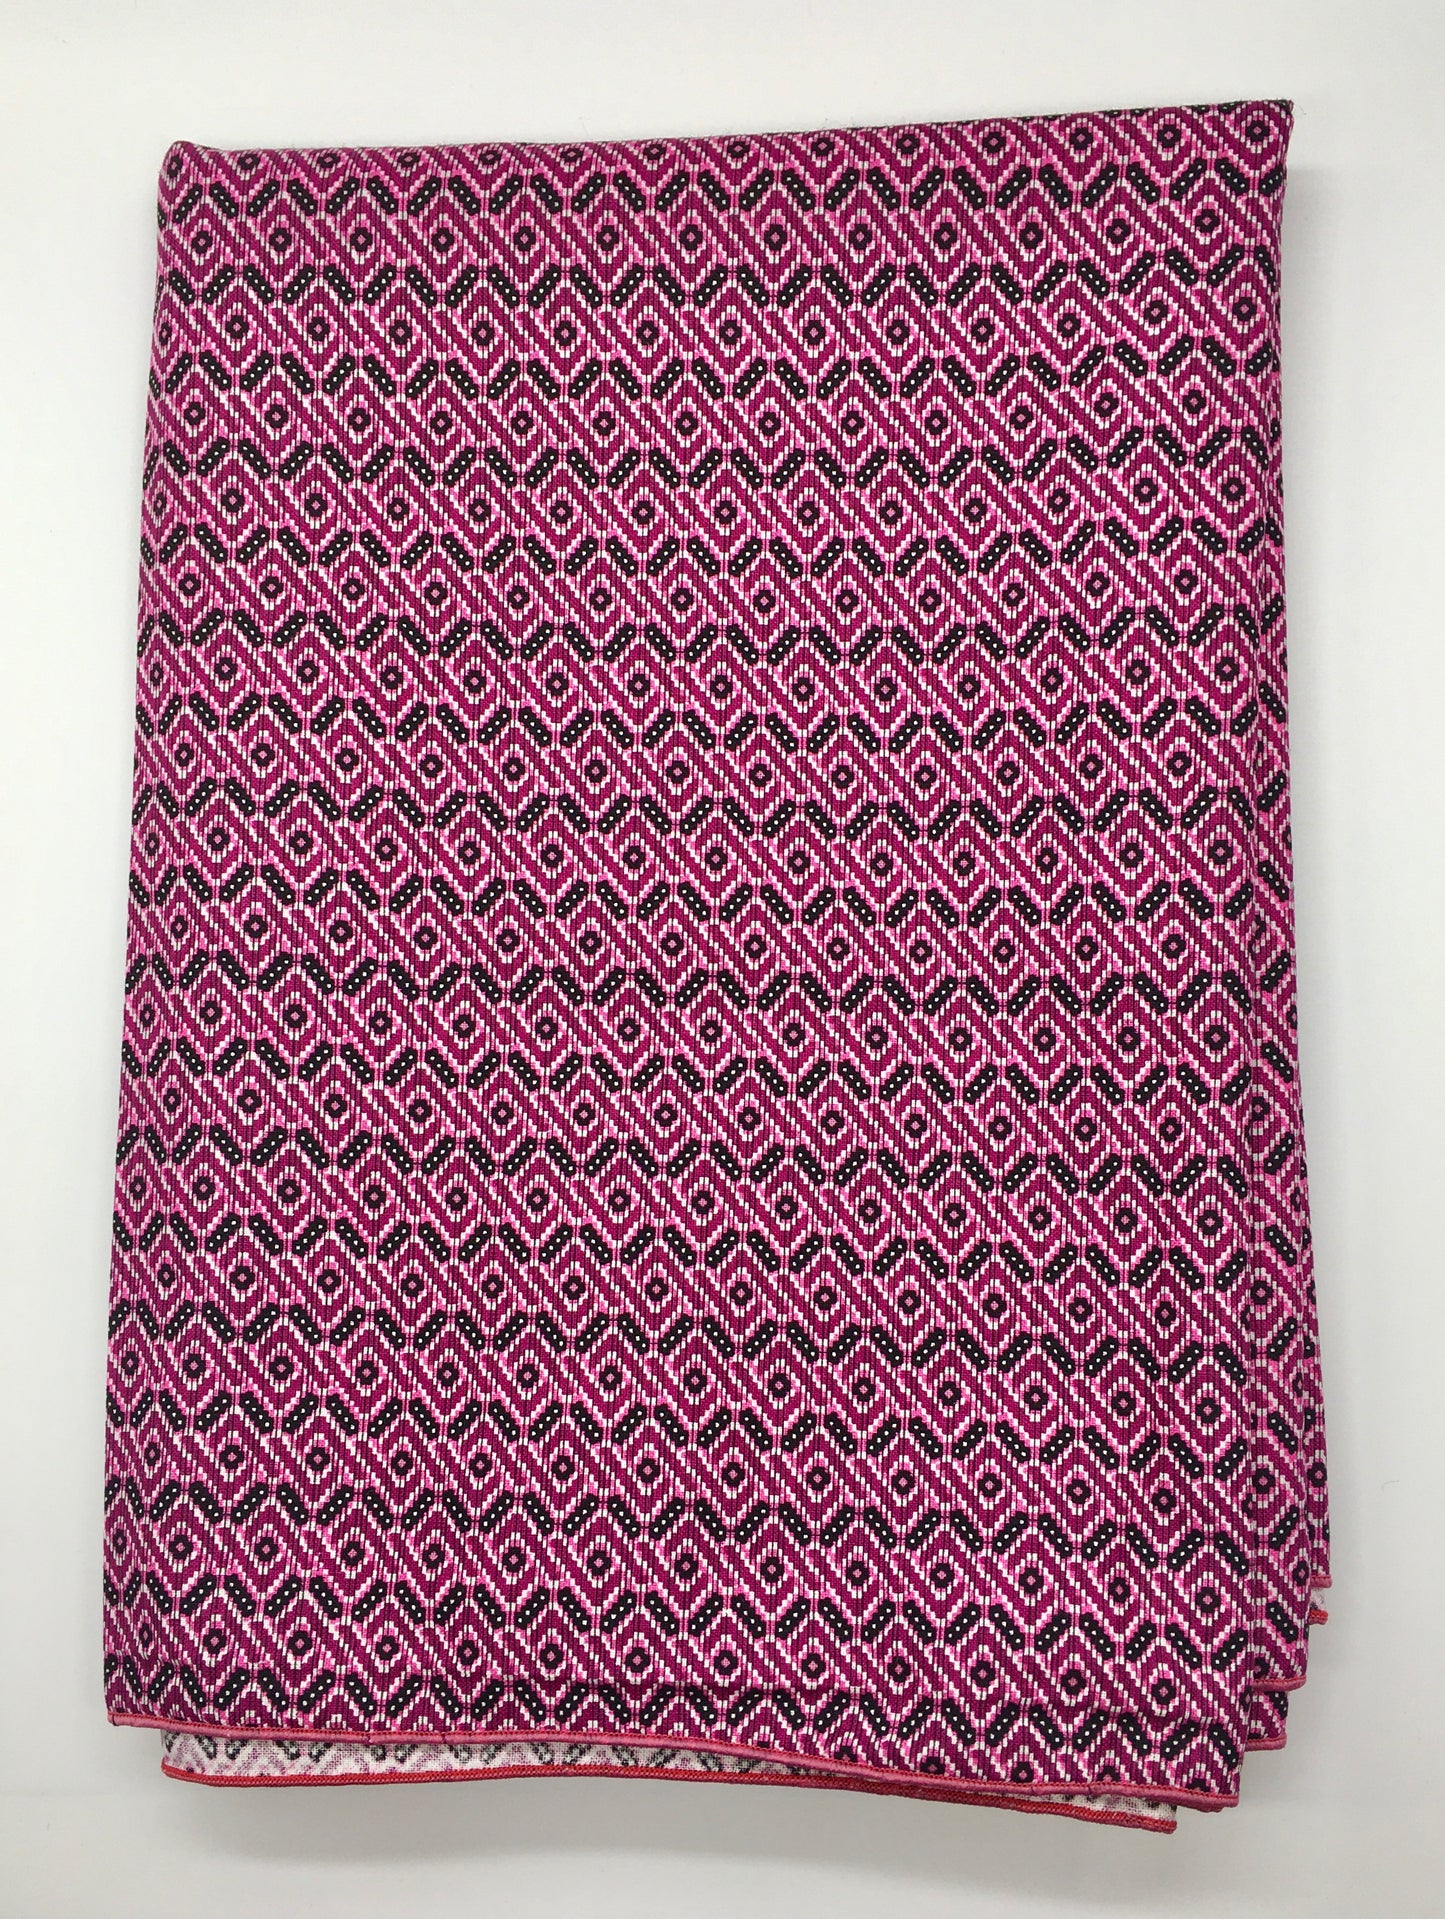 Head Wrap: Pink, Black, and White (XL)